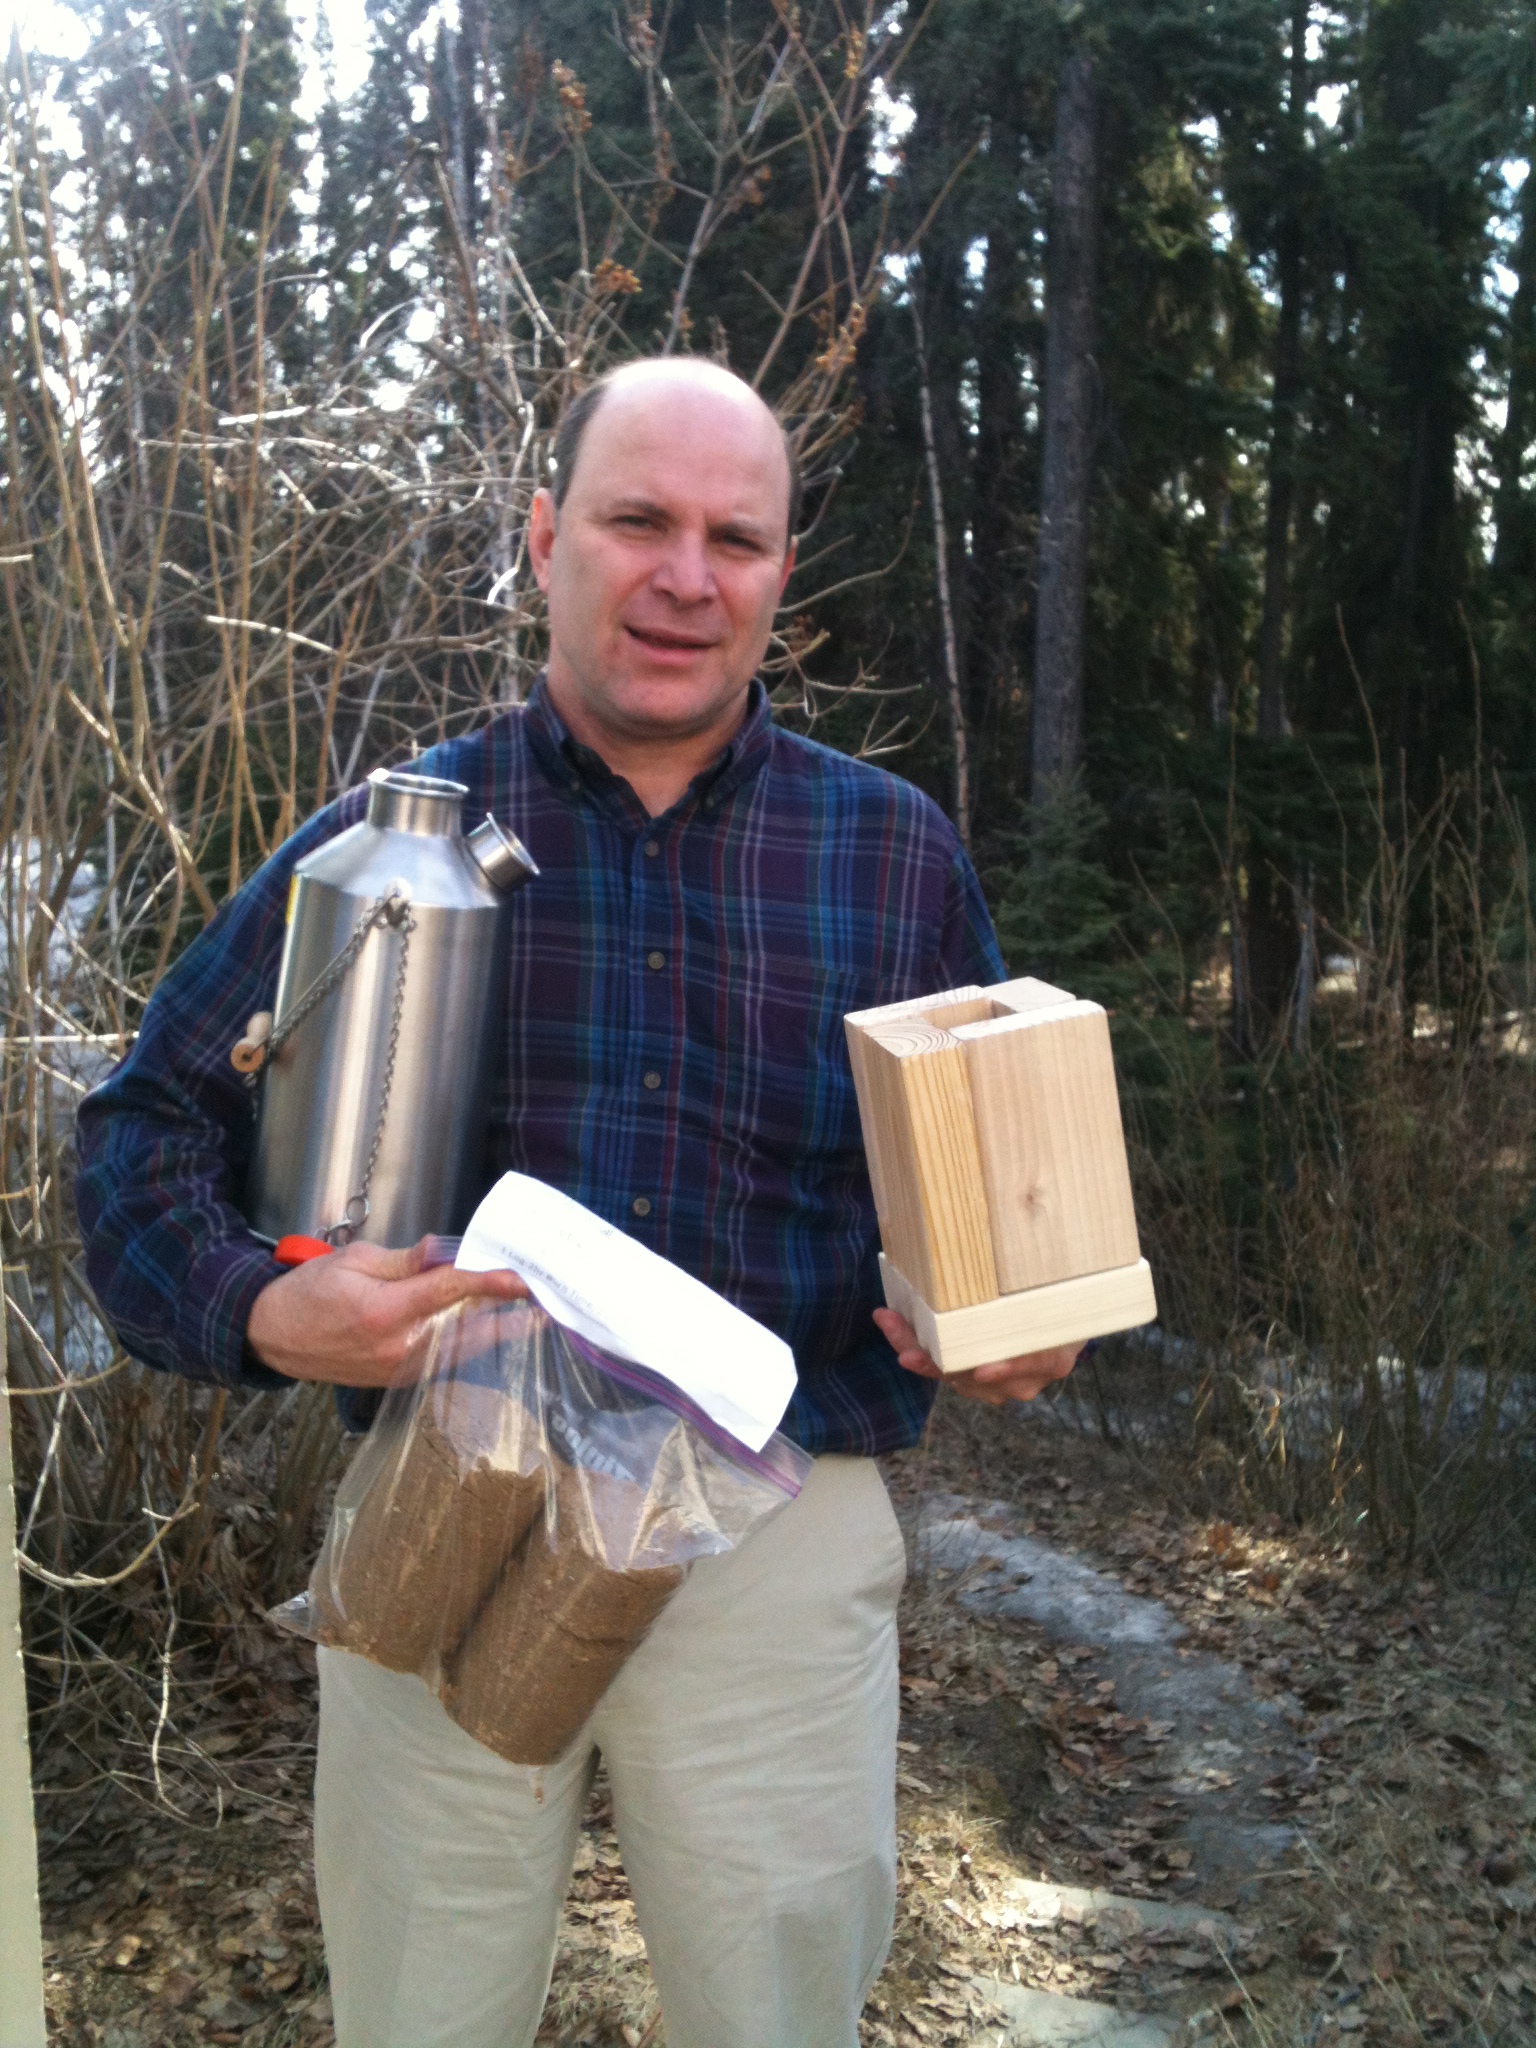 Art Nash shows a commercially produced Kelly Kettle, homemade firelogs and a 2-by-6-inch stove. Photo by Julie Stricker